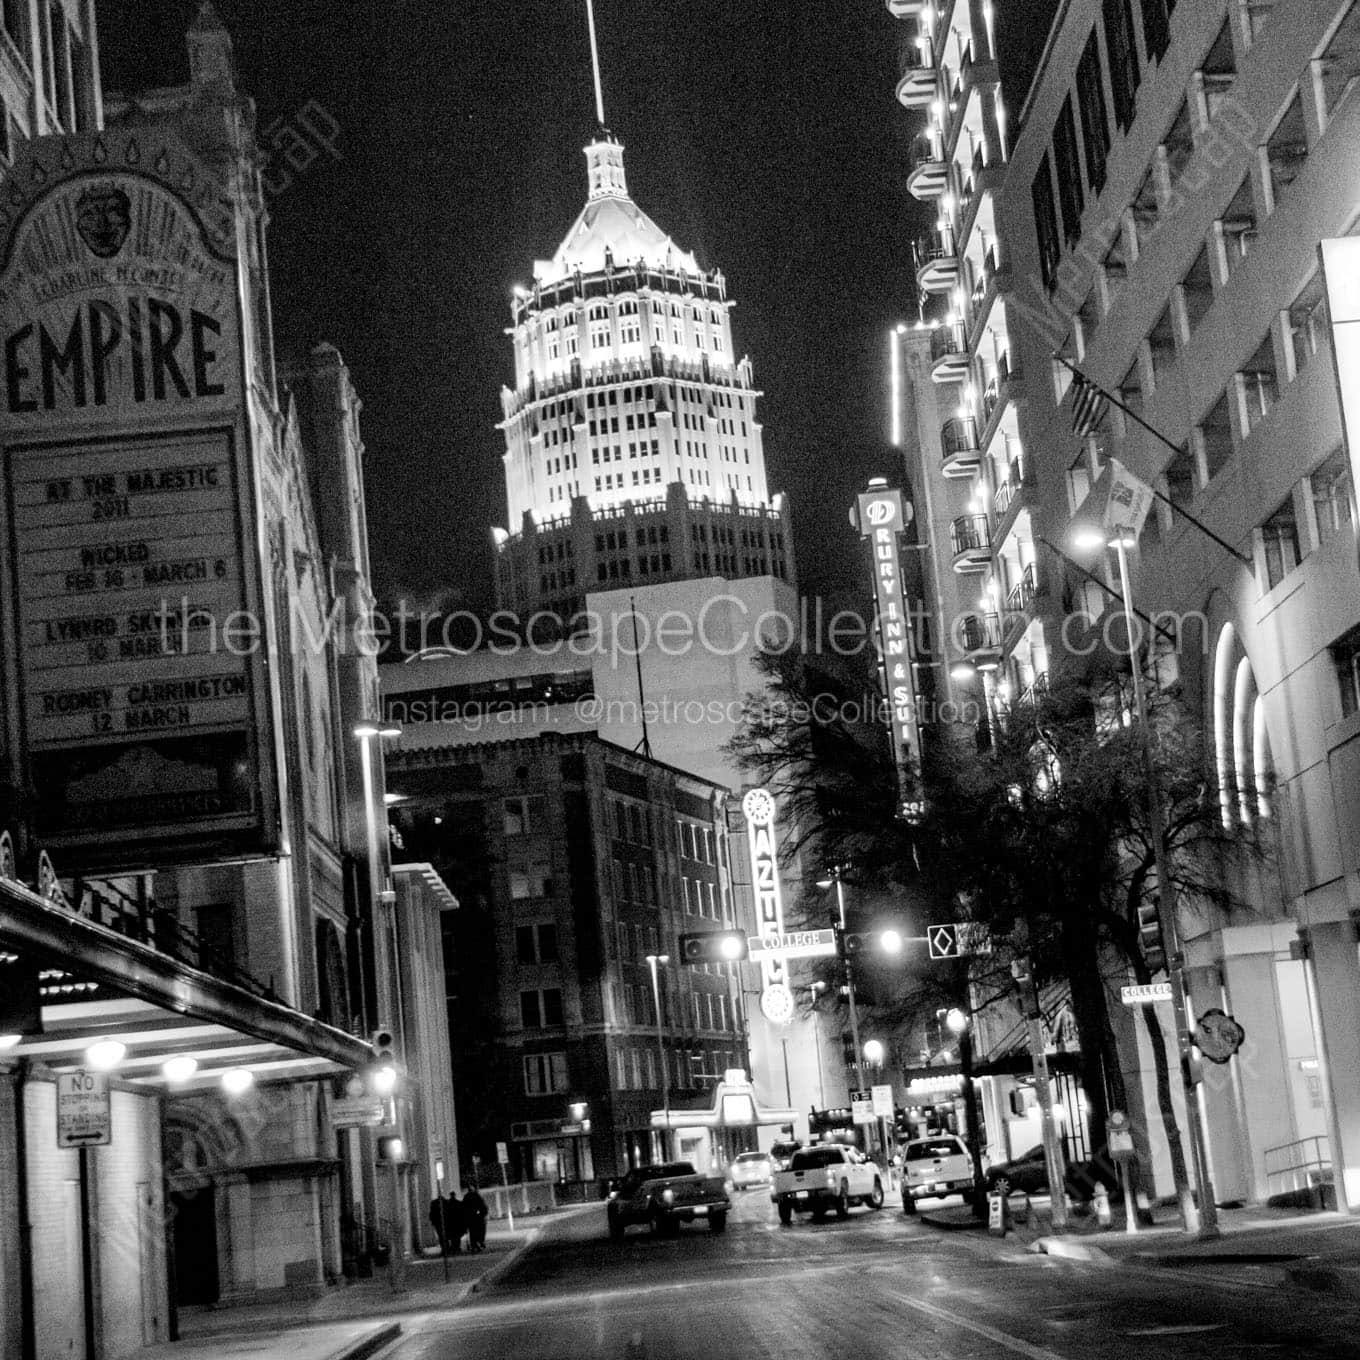 tower life building aztec theater at night Black & White Wall Art